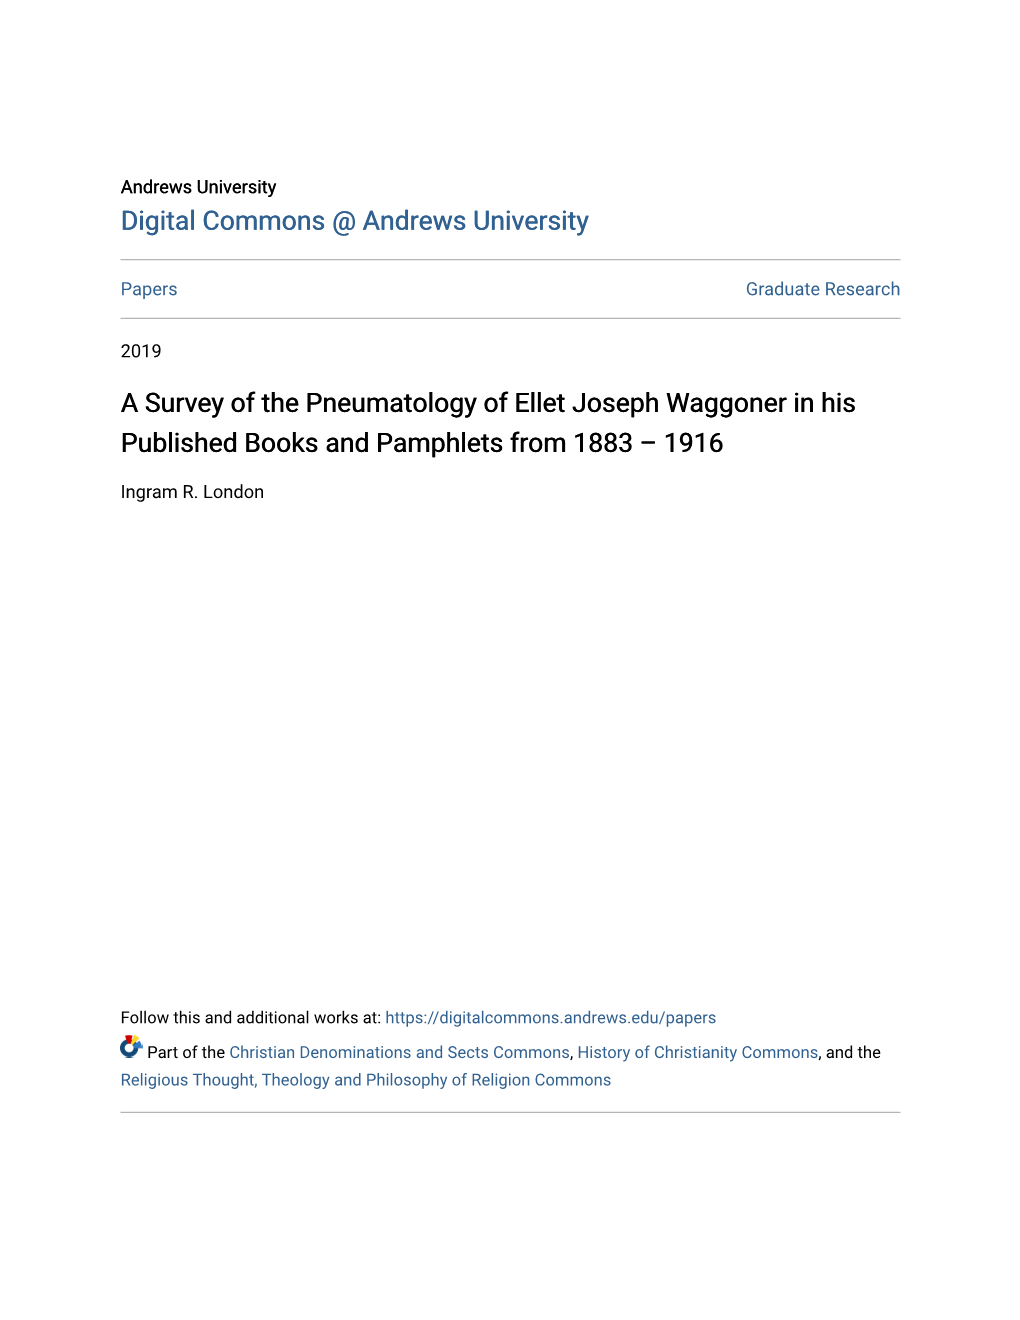 A Survey of the Pneumatology of Ellet Joseph Waggoner in His Published Books and Pamphlets from 1883 – 1916